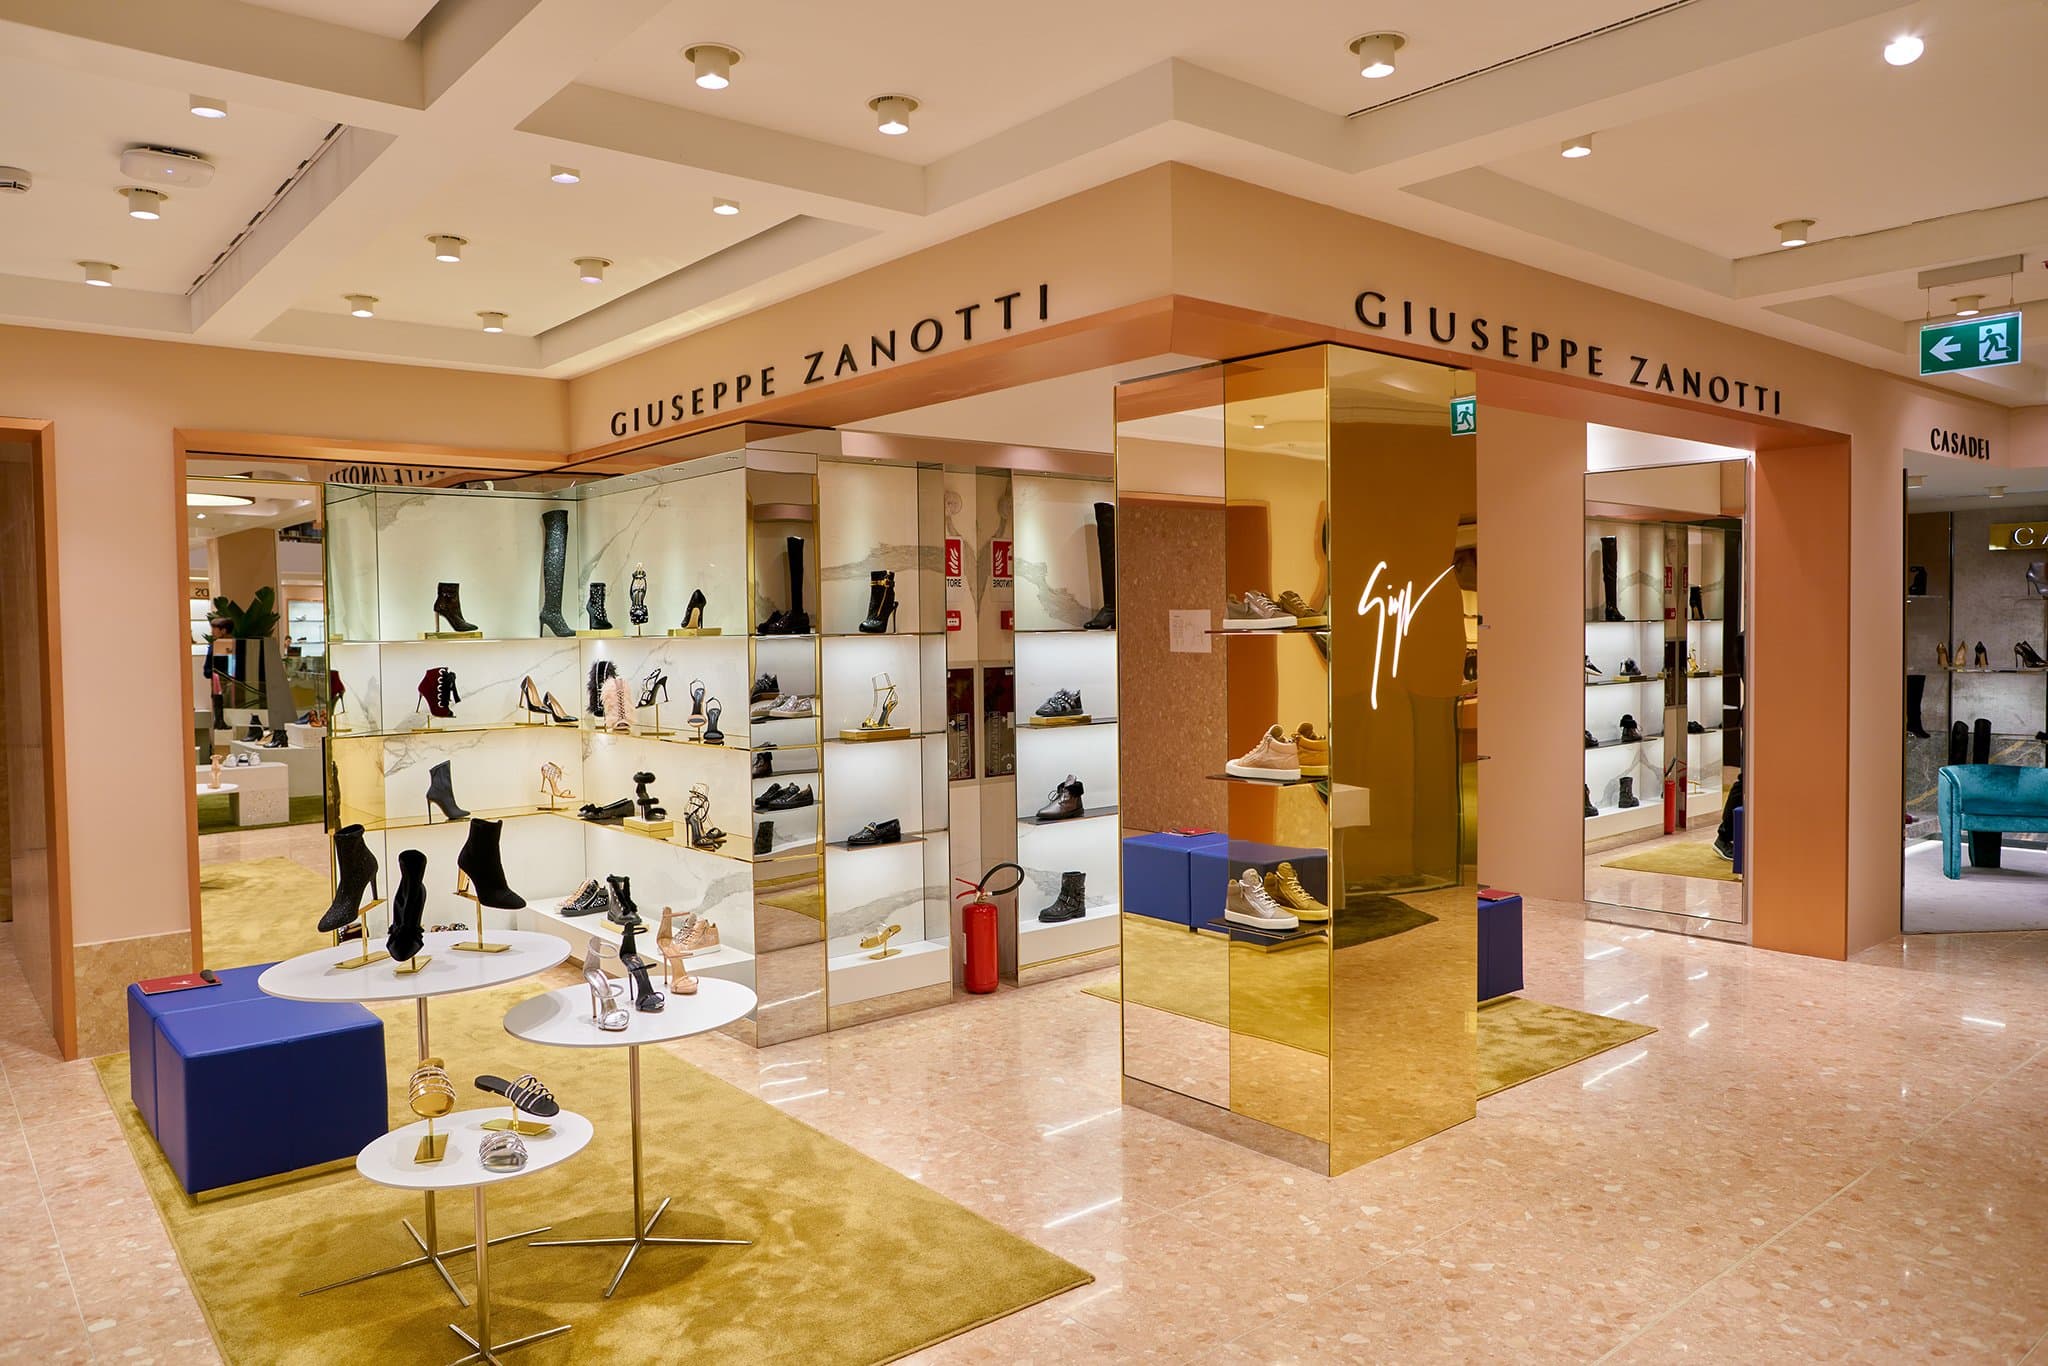 Giuseppe Zanotti is known for his unique and meticulously hand-crafted shoe designs